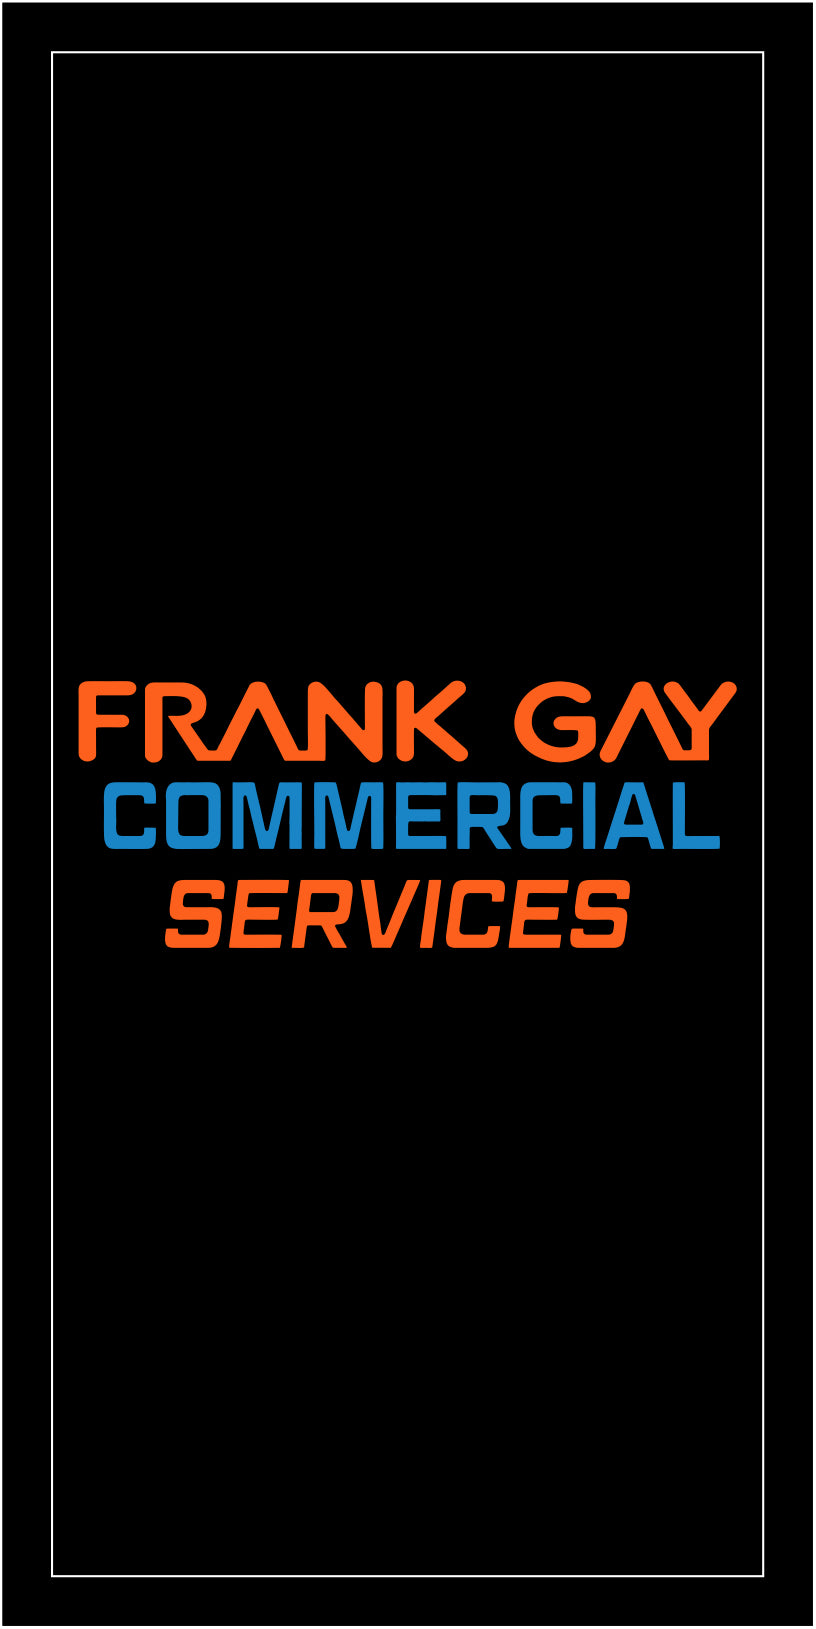 Frank Gay Commercial Services Vertical §